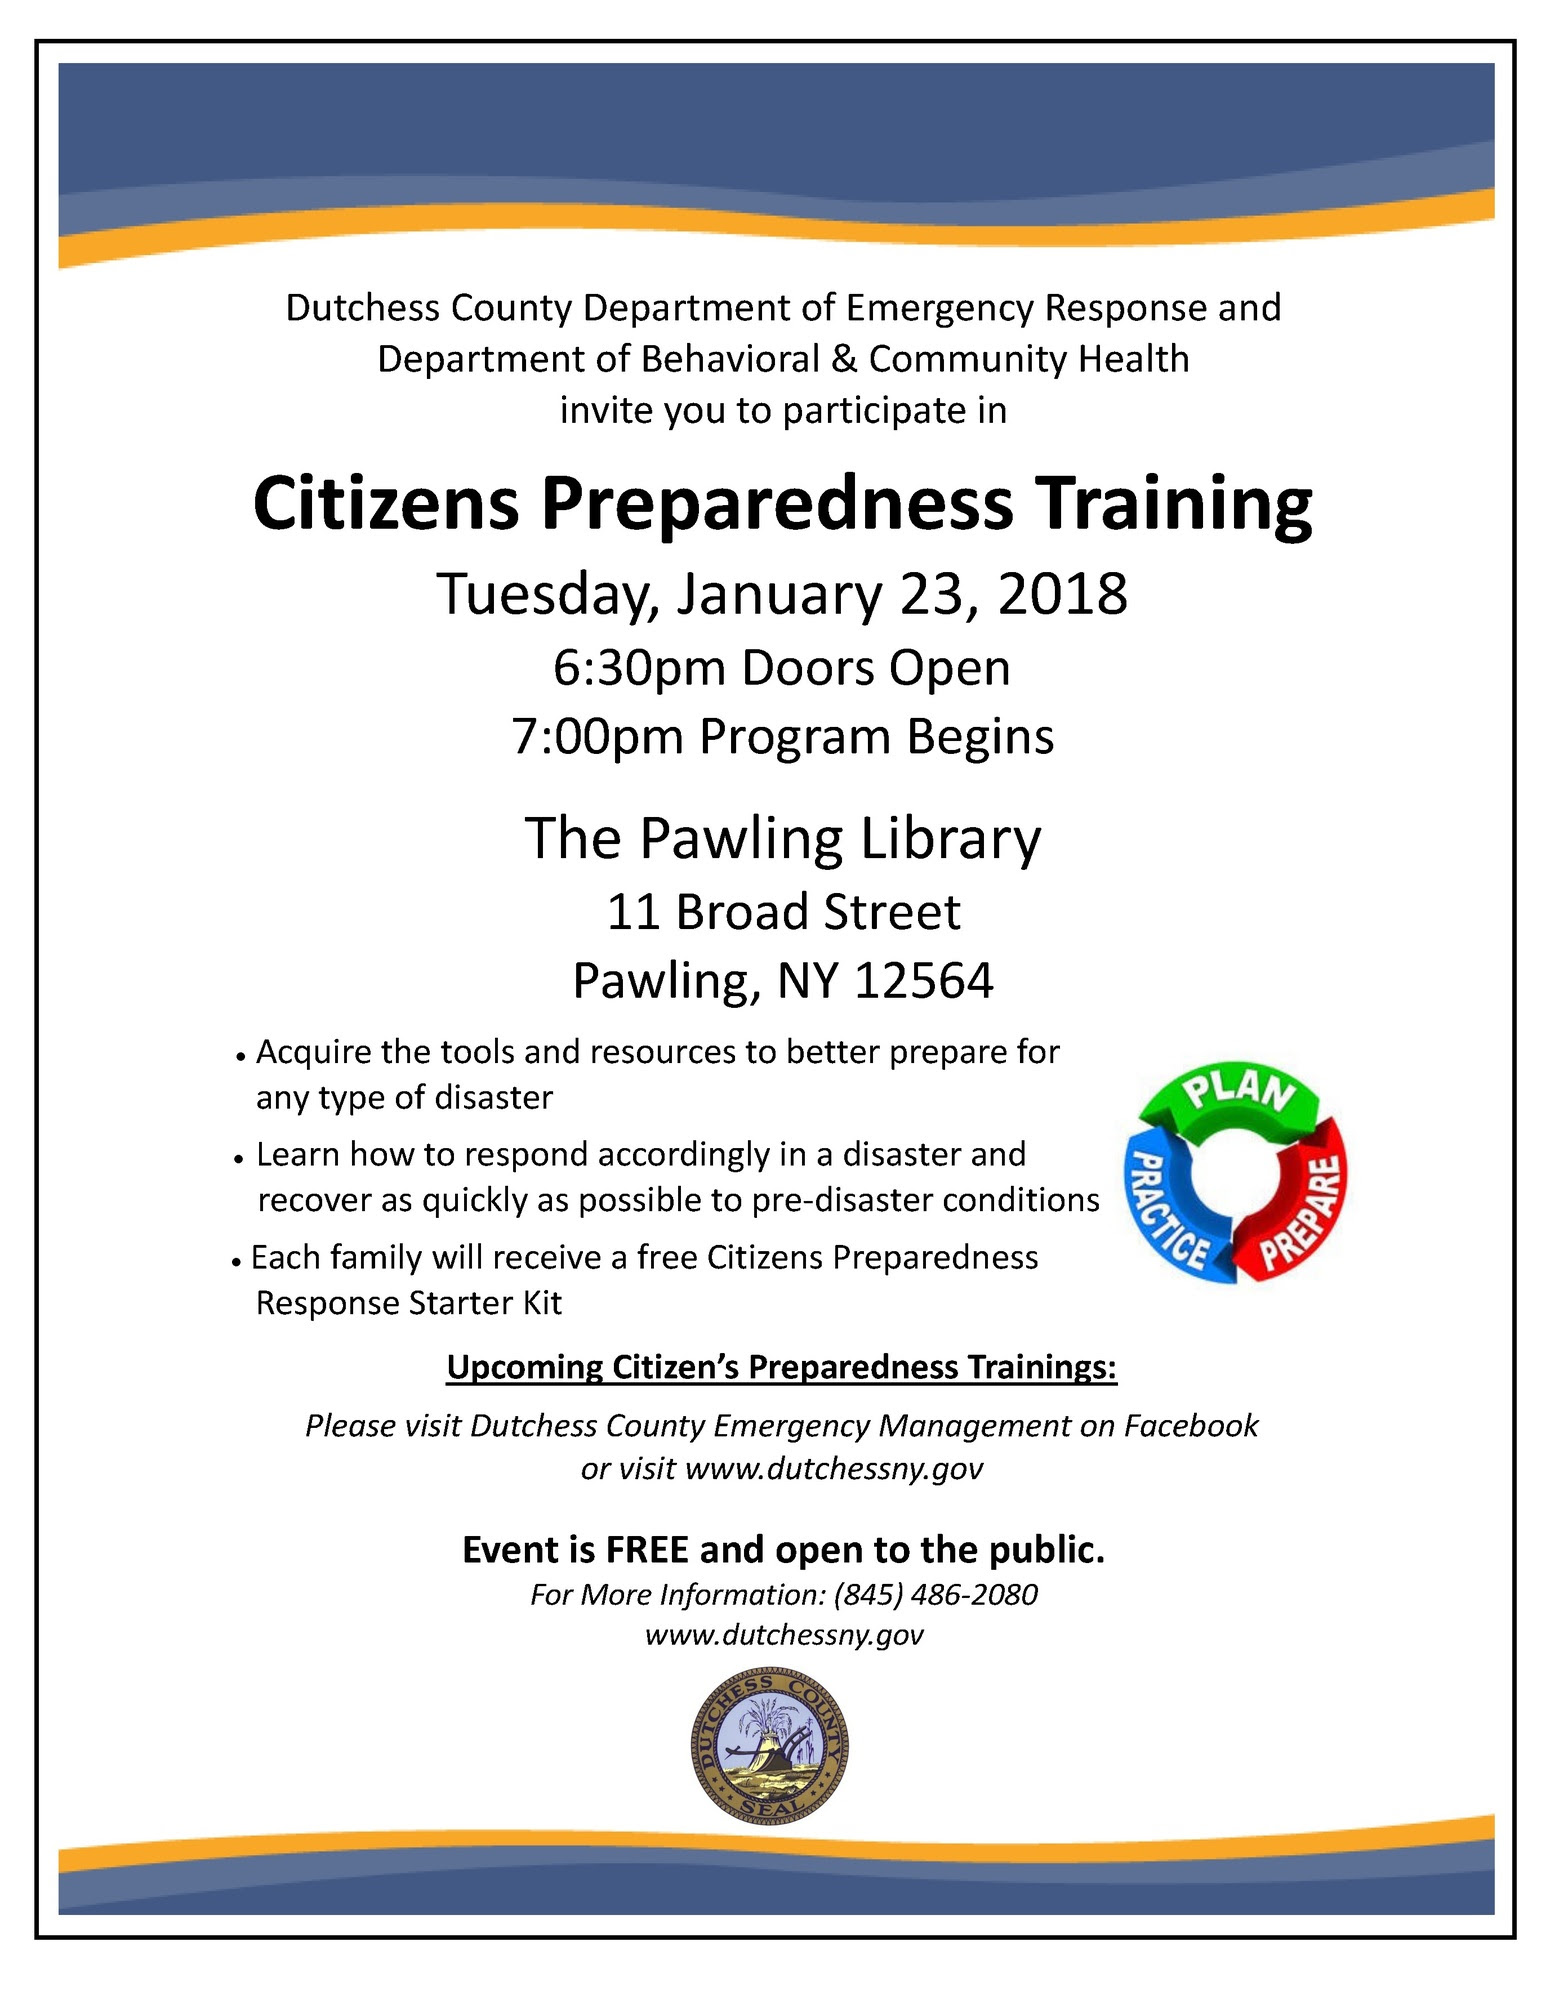 Citizens Preparedness - Pawling Library